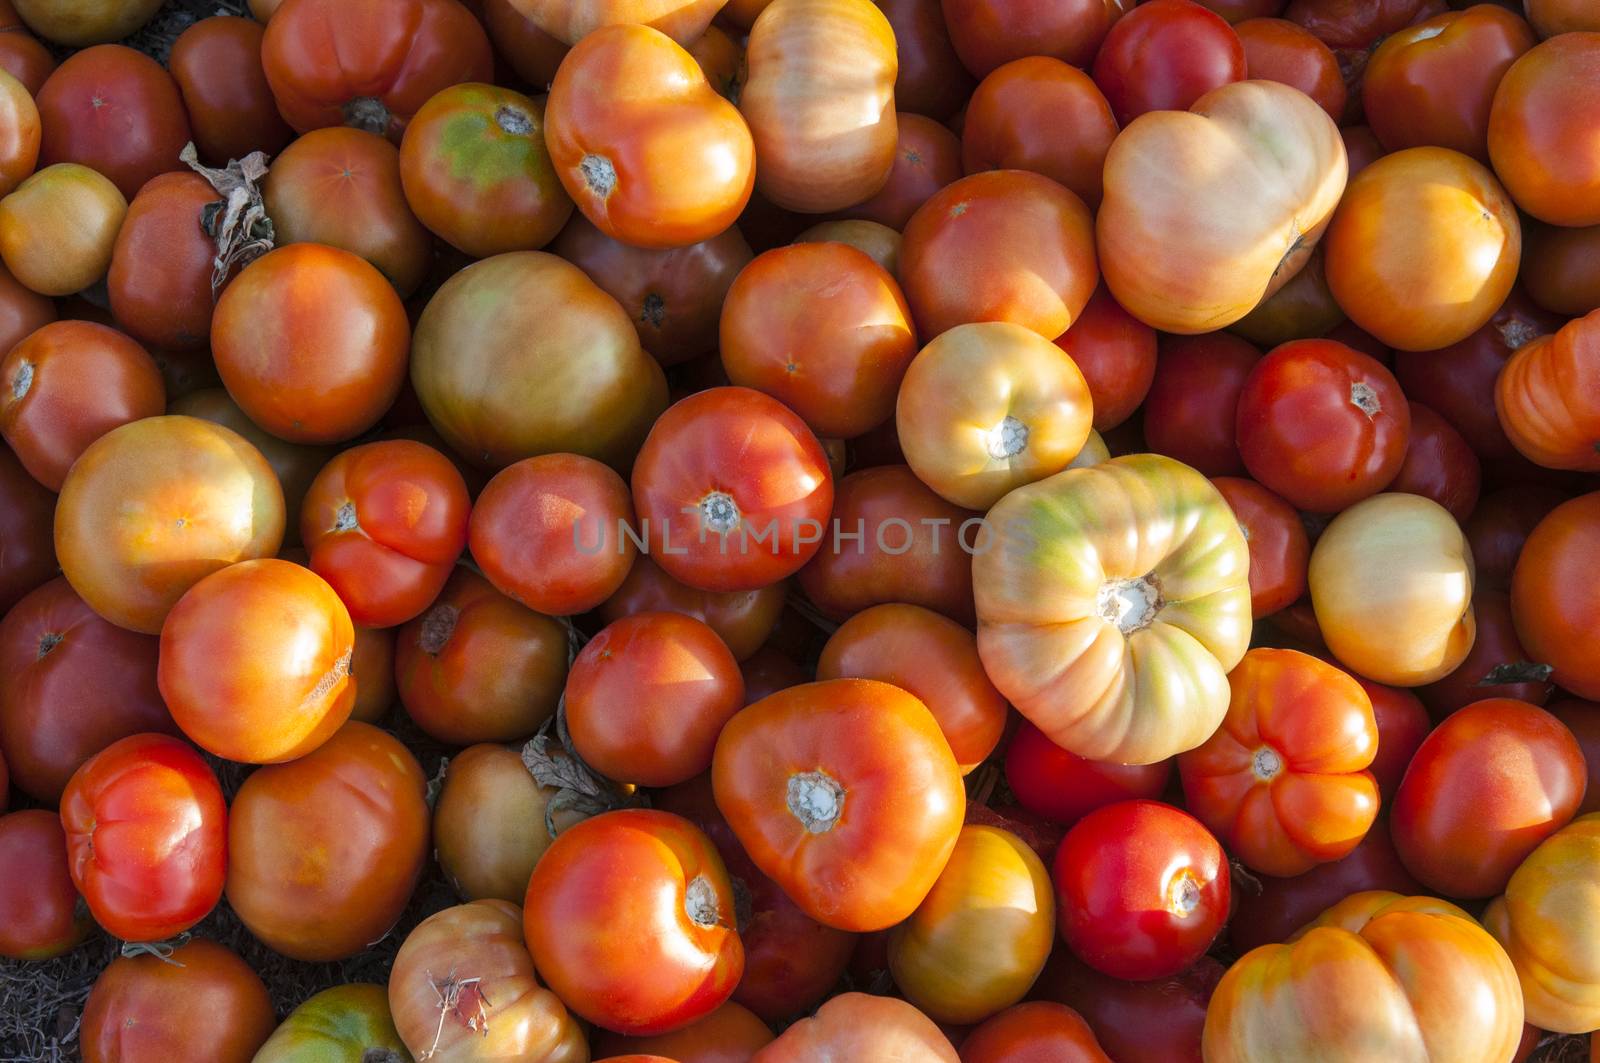 Pile of ripe tomatoes by Njean